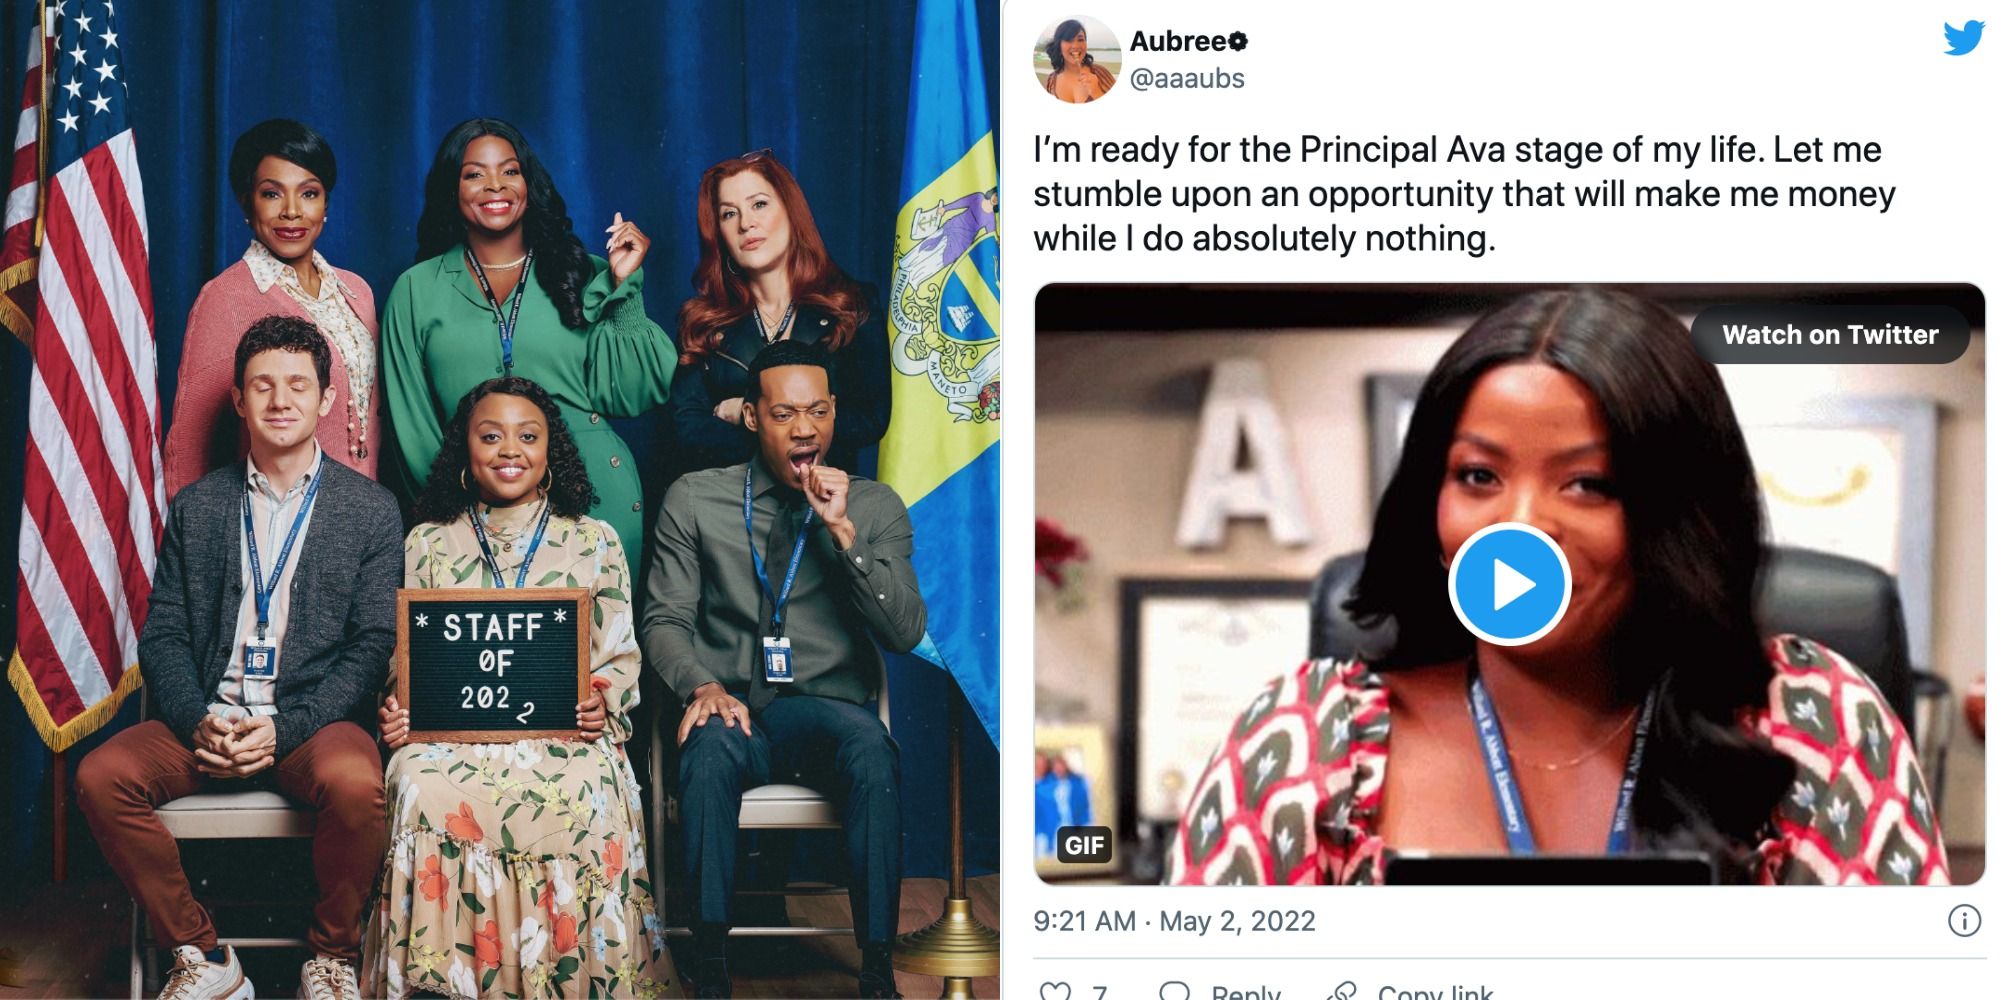 Two side by side images of some of the cast of Abbott Elementary and a tweet about the show